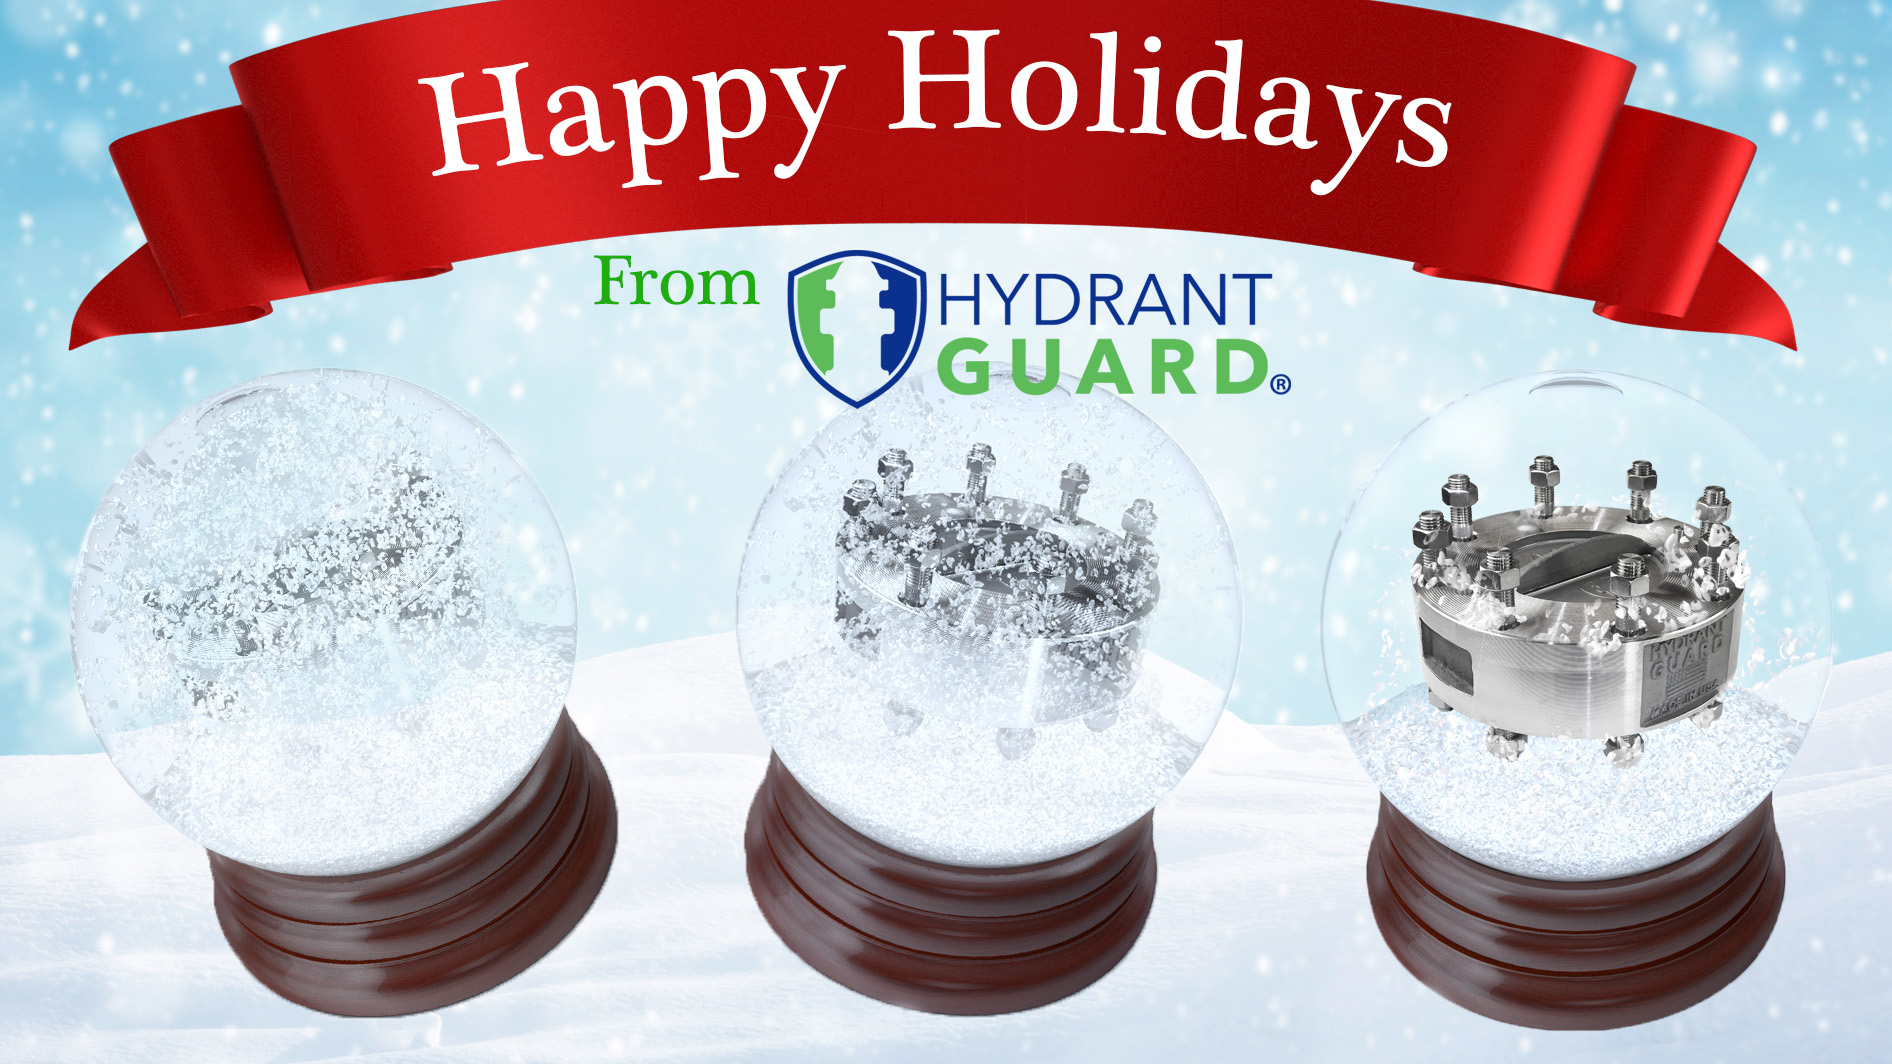 Hydrant Guard in snow globes holiday graphic